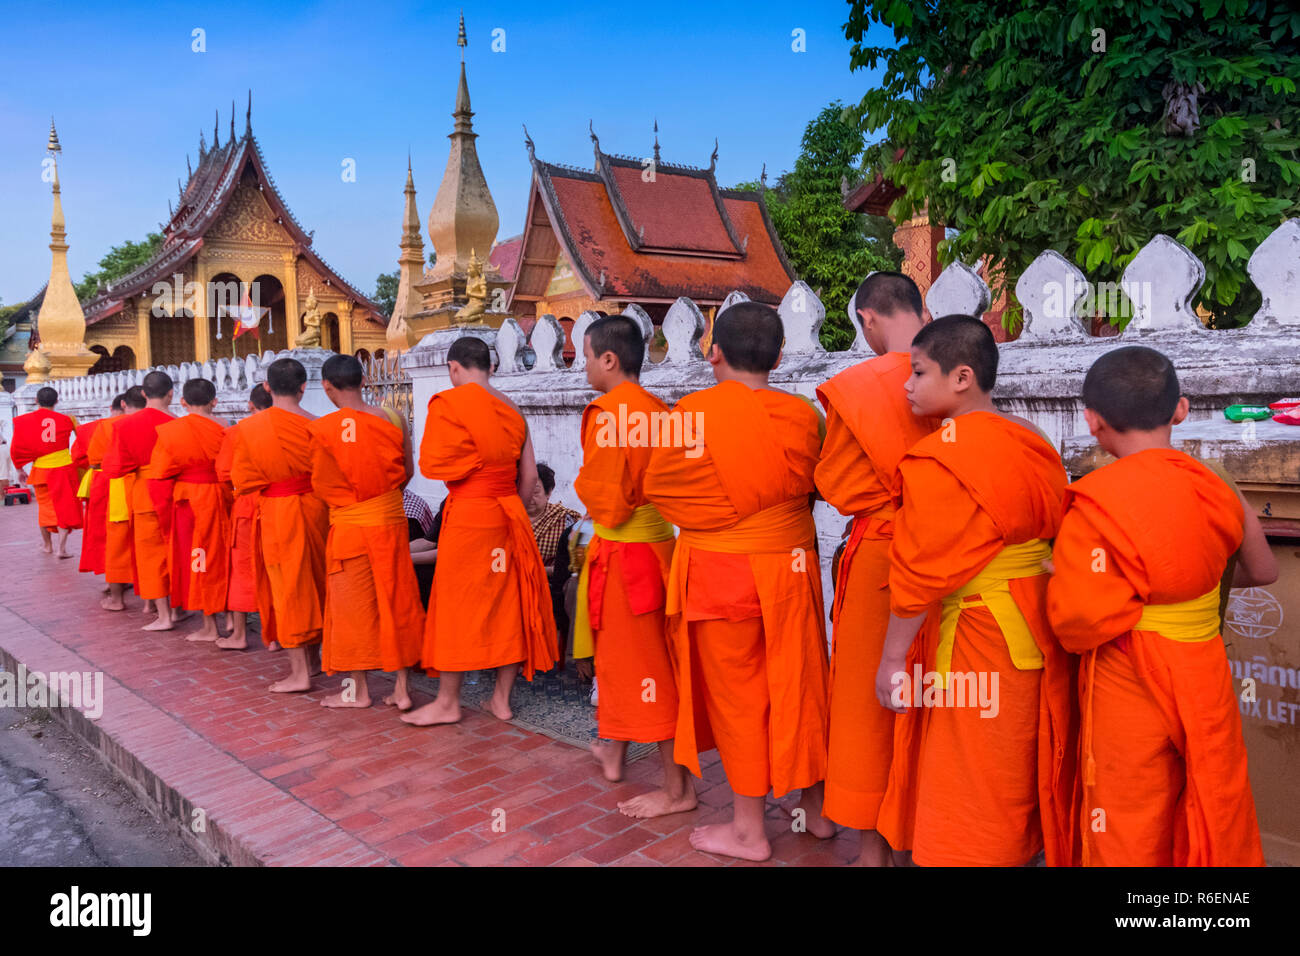 Young Monks At The Alms Giving Ceremony In Front Of The Wat Sene, Luang Prabang, Laos Stock Photo